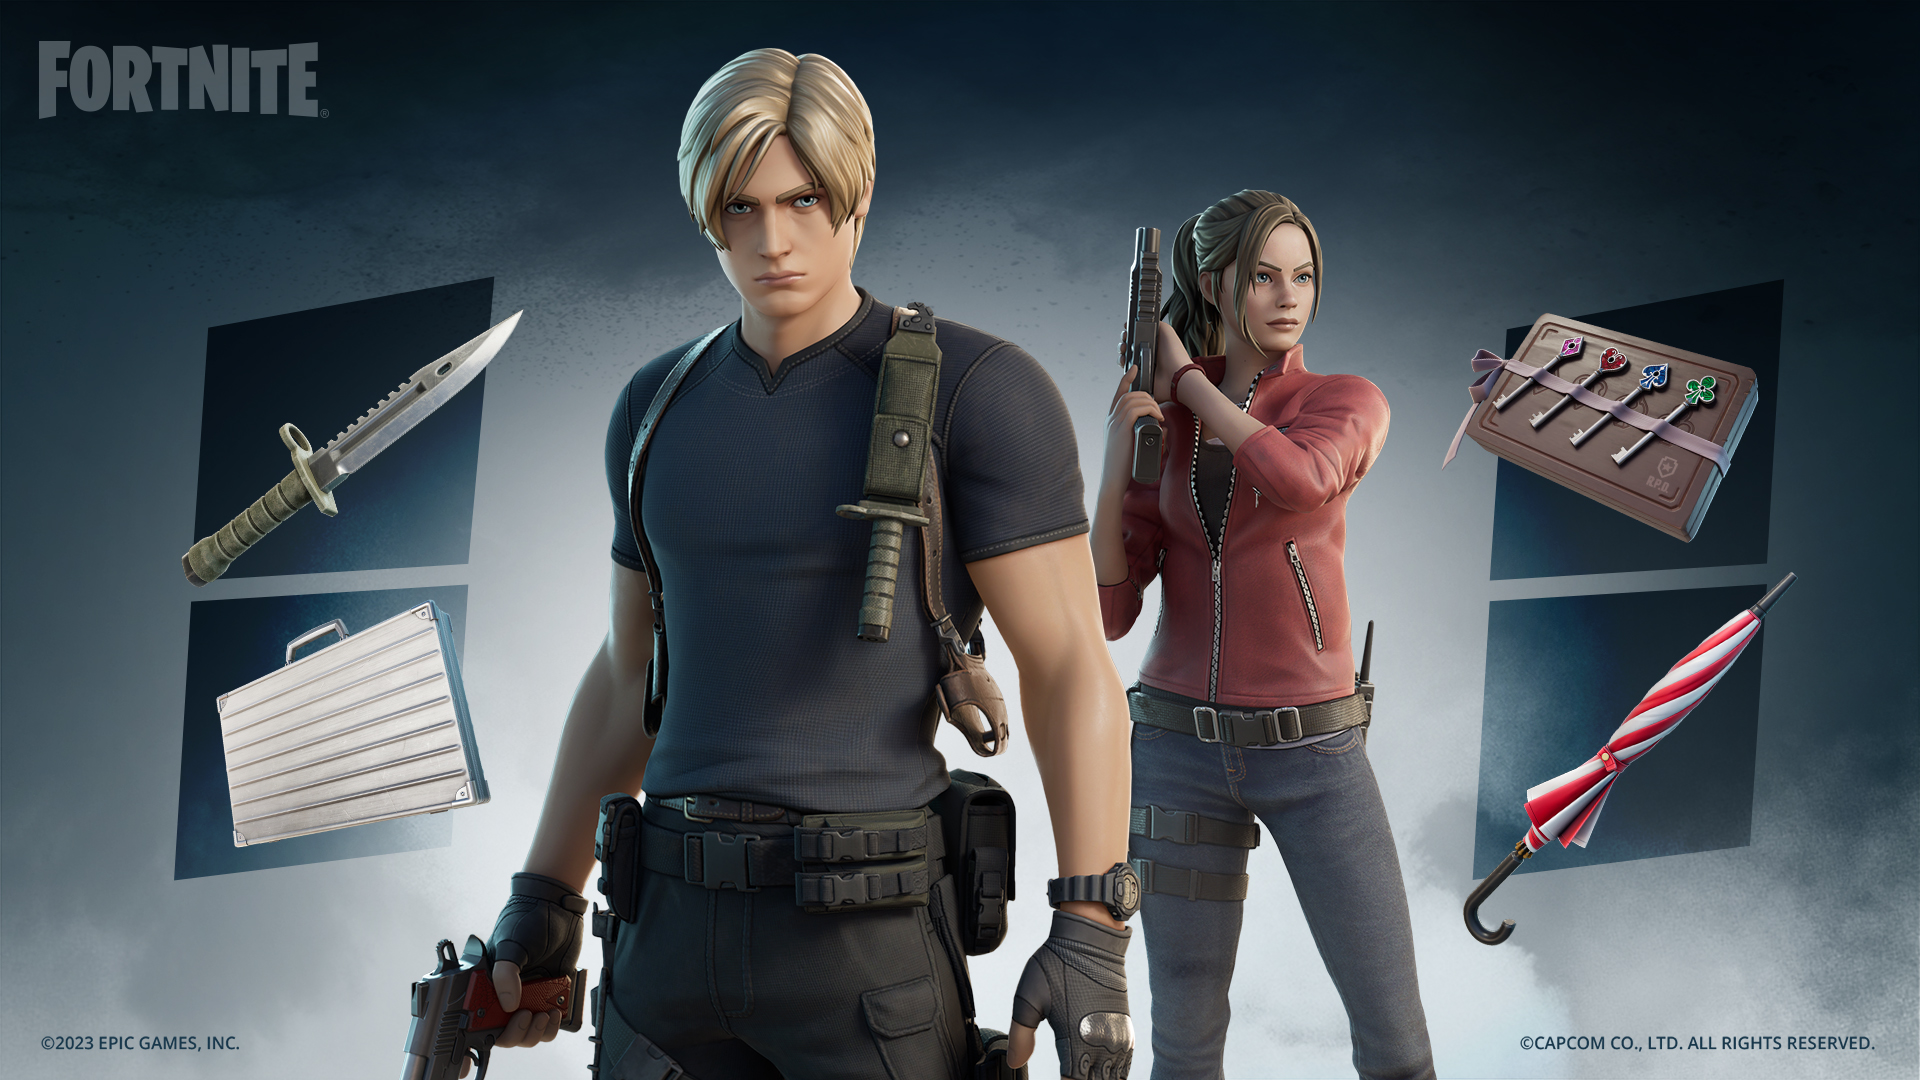 Leon S. Kennedy and Claire Redfield have arrived at Fortnite to promote Resident Evil 4 Remake